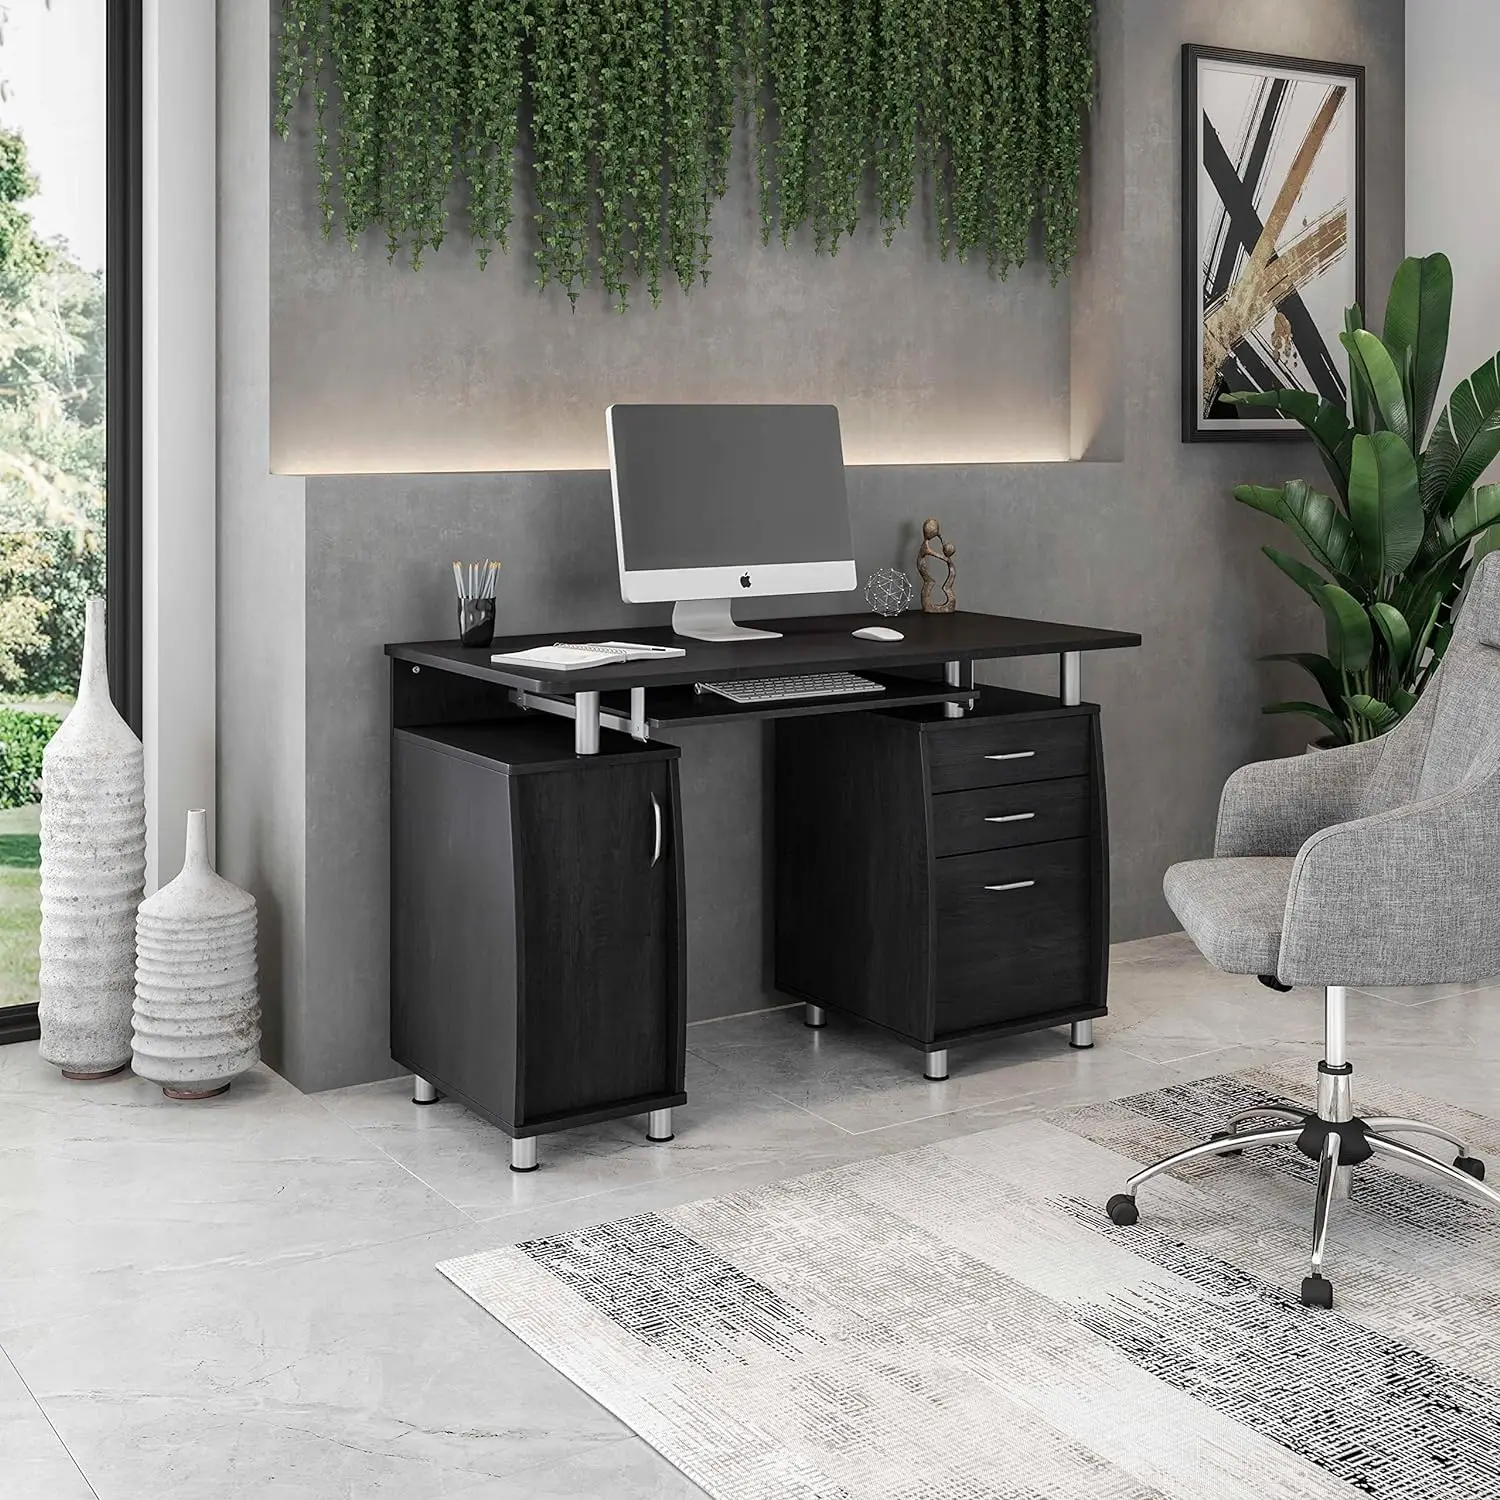 

47.25" Ergonomic Computer Drawers & File Cabinet for Home Office Storage, Espresso Writing Desk,ONE Size